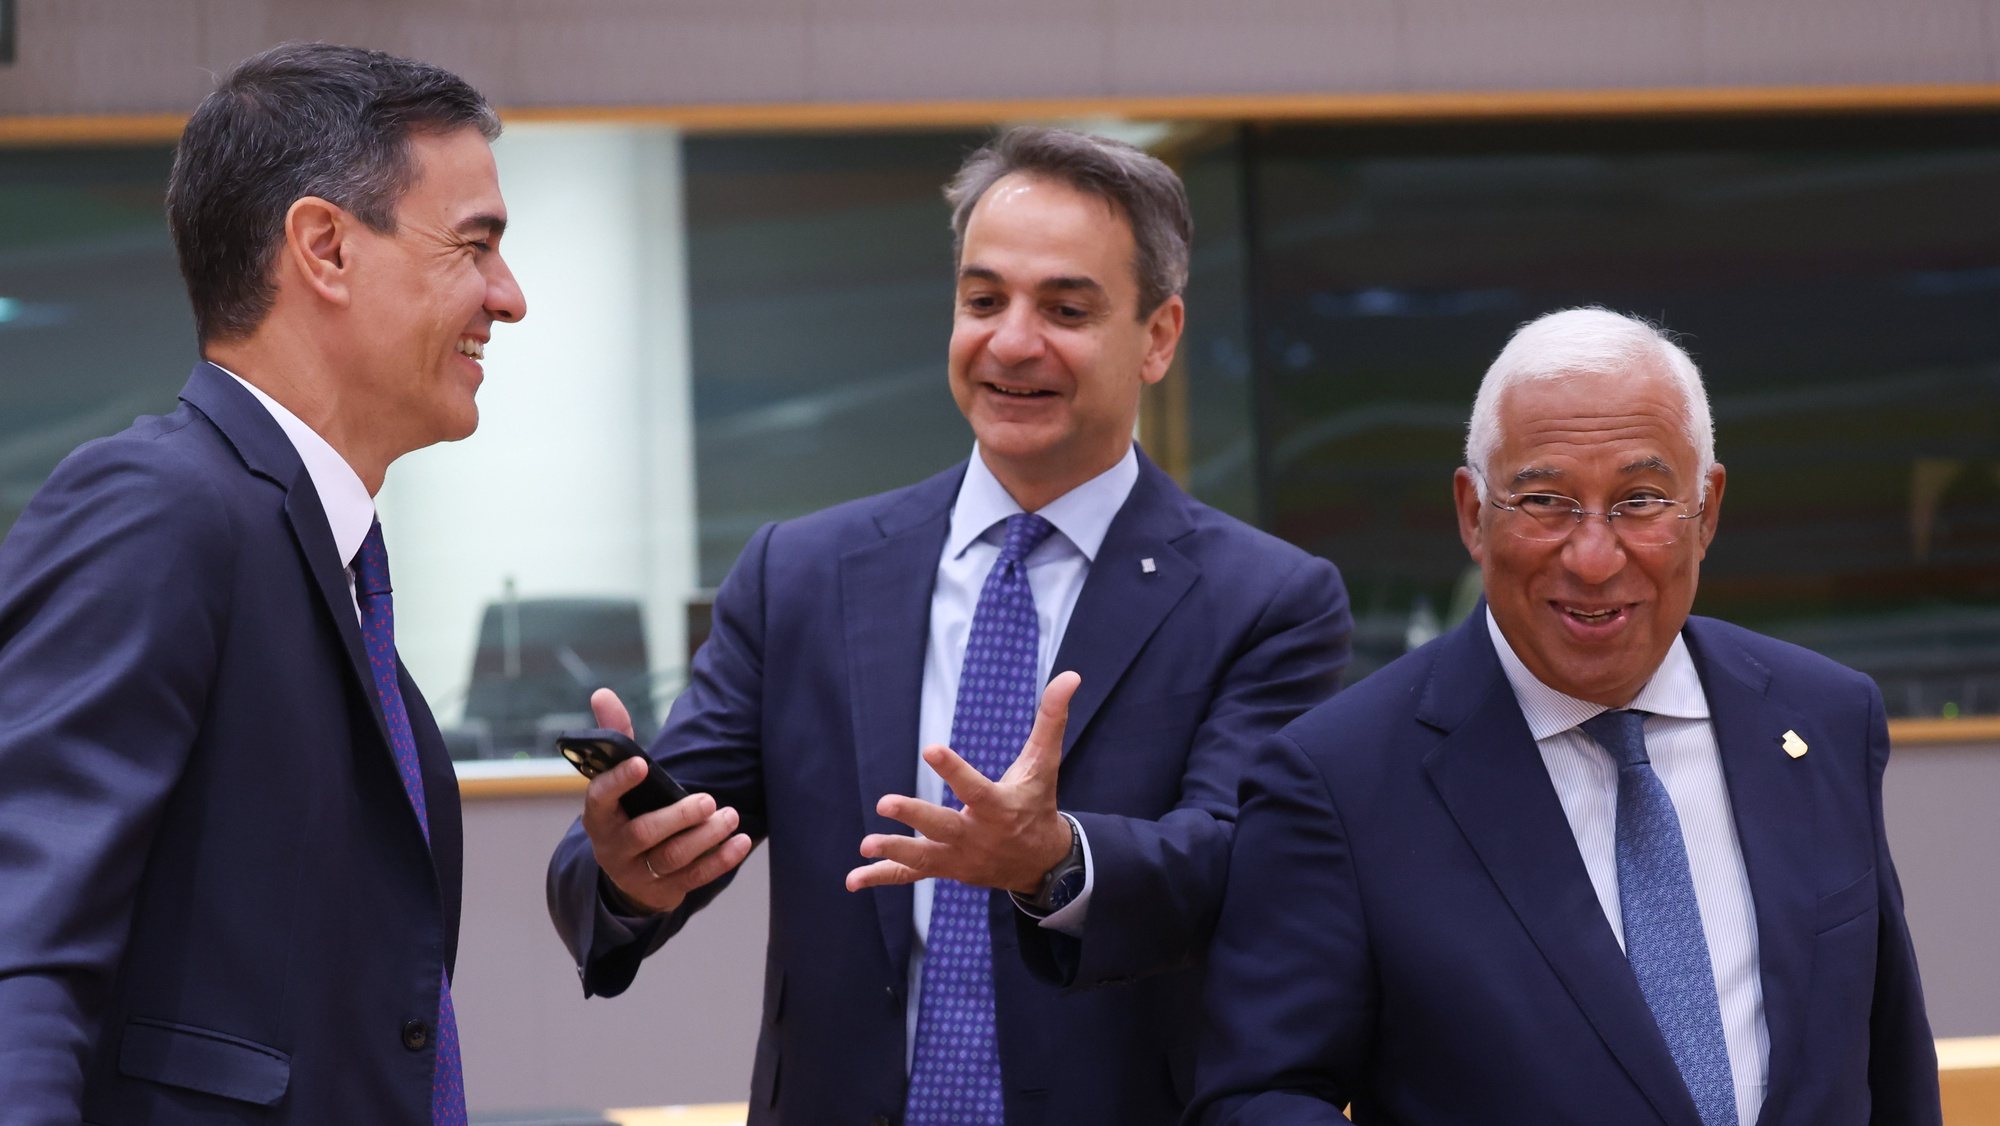 epa10718714 (L-R) Spain&#039;s Prime minister Pedro Sanchez, Greece&#039;s Prime Minister Kyriakos Mitsotakis and Portugal&#039;s Prime Minister Antonio Costa at the second day of a European Council in Brussels, Belgium, 30 June 2023. EU leaders are gathering in Brussels for a two-day summit to discuss the latest developments in relation to Russia&#039;s invasion of Ukraine and continued EU support for Ukraine as well as the block&#039;s economy, security, migration and external relations, among other topics.  EPA/OLIVIER HOSLET